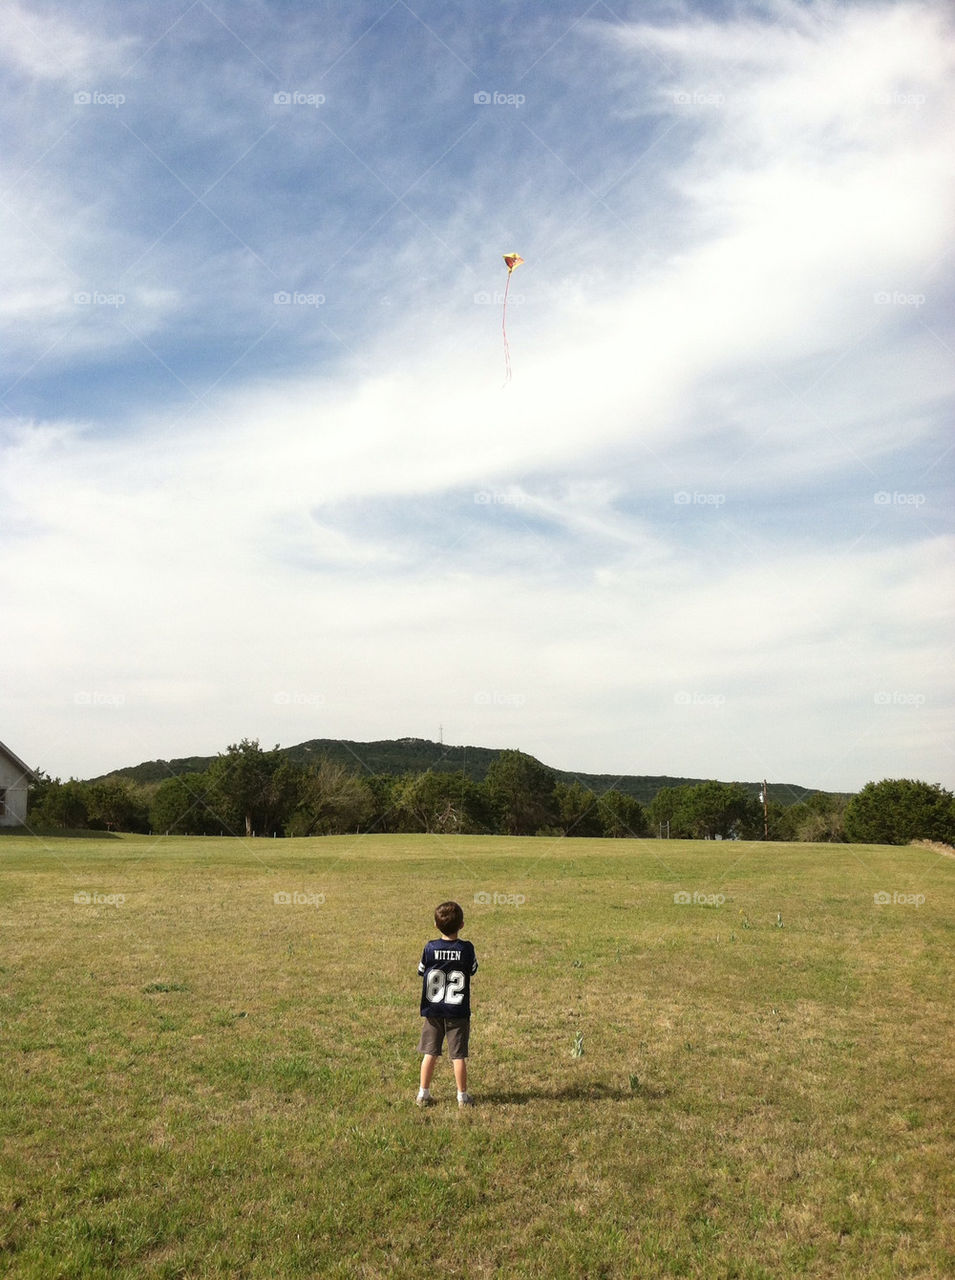 A boy and his kite